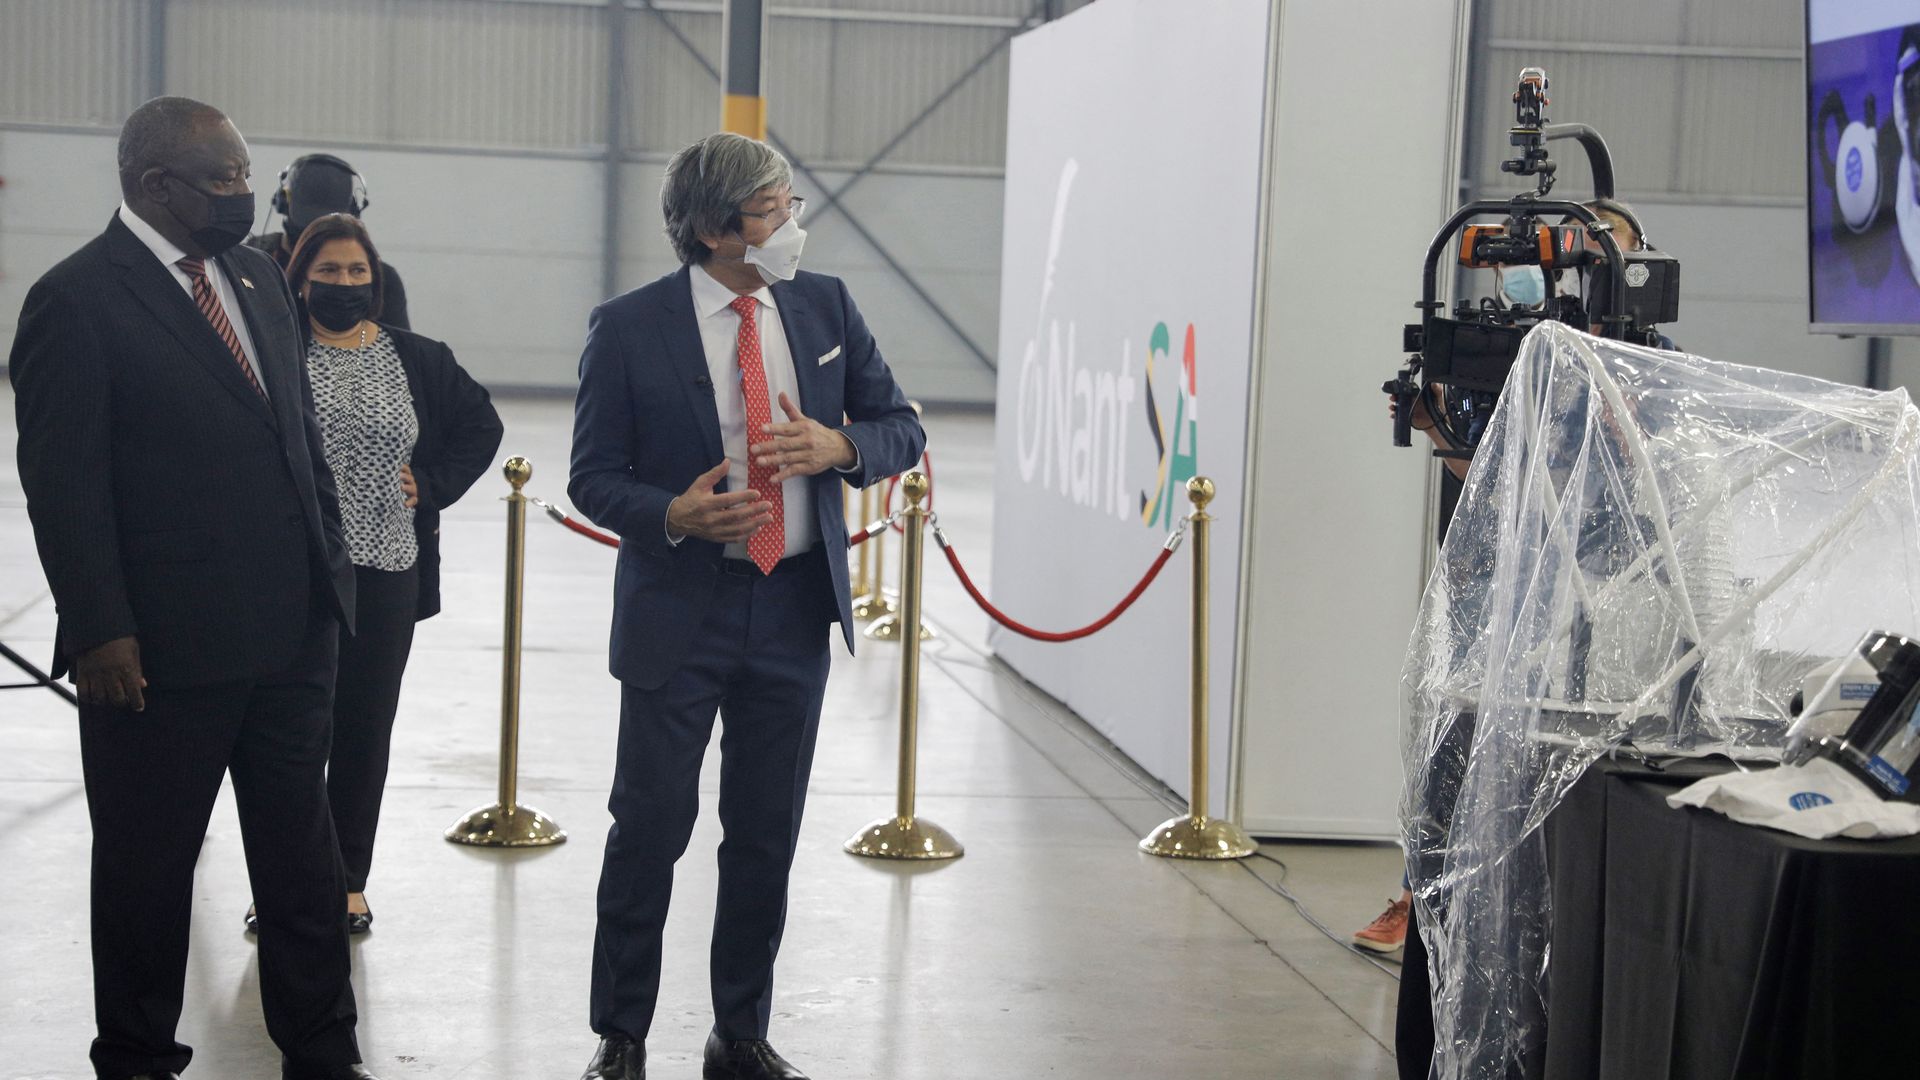 South African President Cyril Ramaphosa (L) and founder of NantWorks Dr Patrick Soon-Shiong (R) tour the facility during the launch of NantSA, the future vaccine manufacturing campus in South Africa.